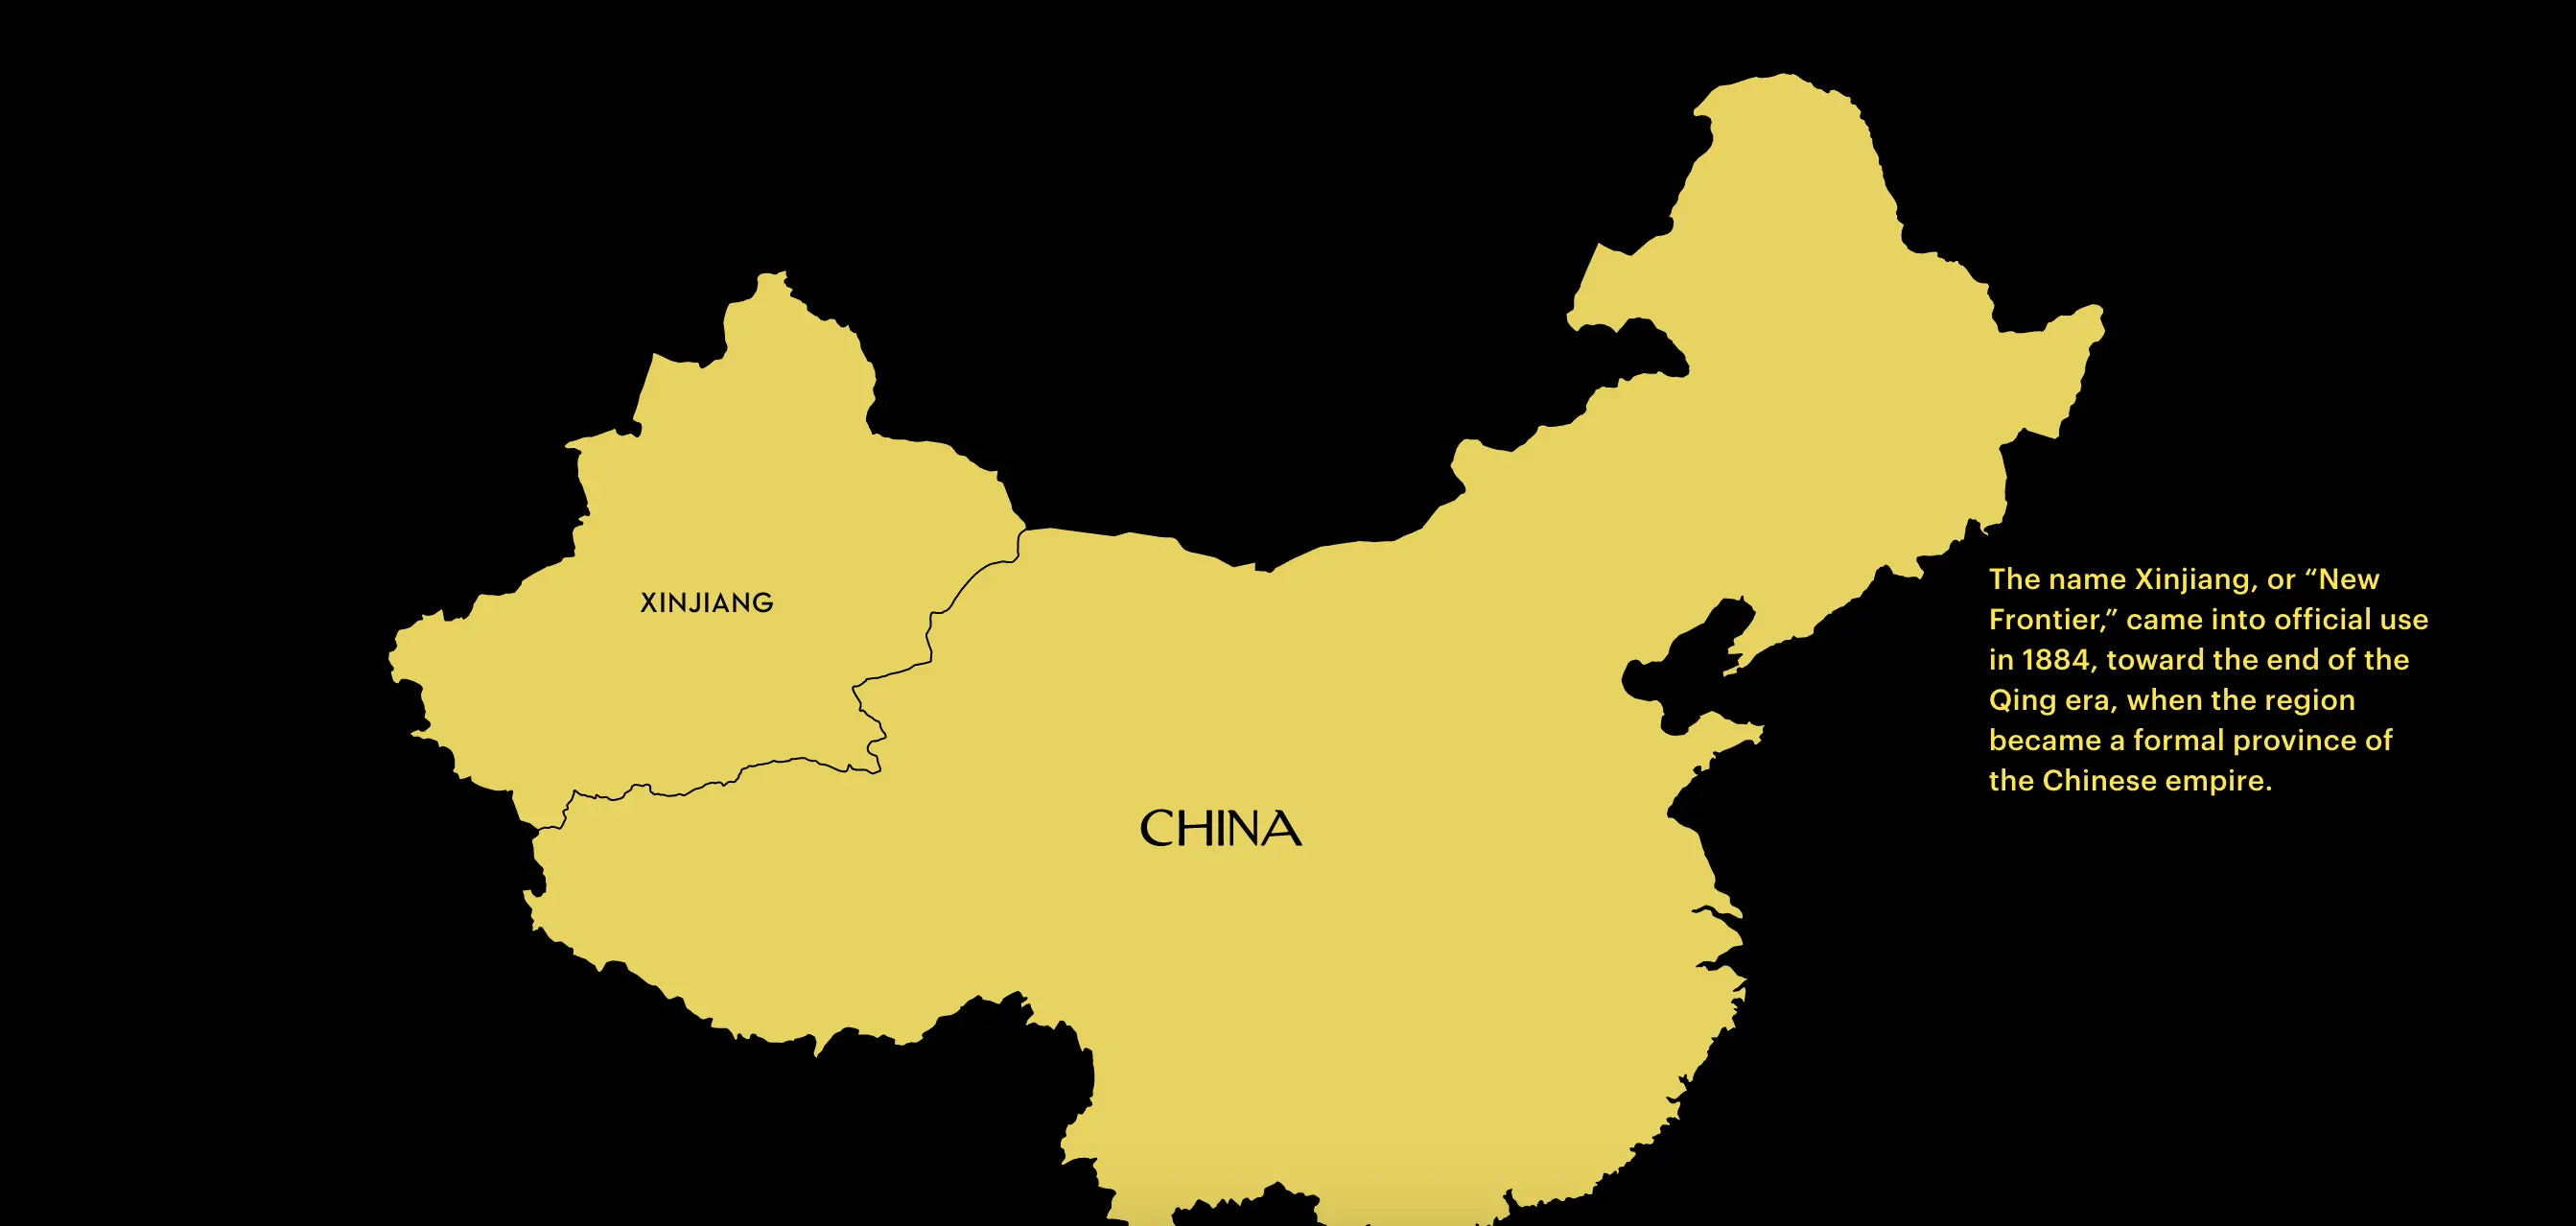 The name Xinjiang, or “New Frontier,” came into official use in 1884, toward the end of the Qing era, when the region became a formal province of the Chinese empire.